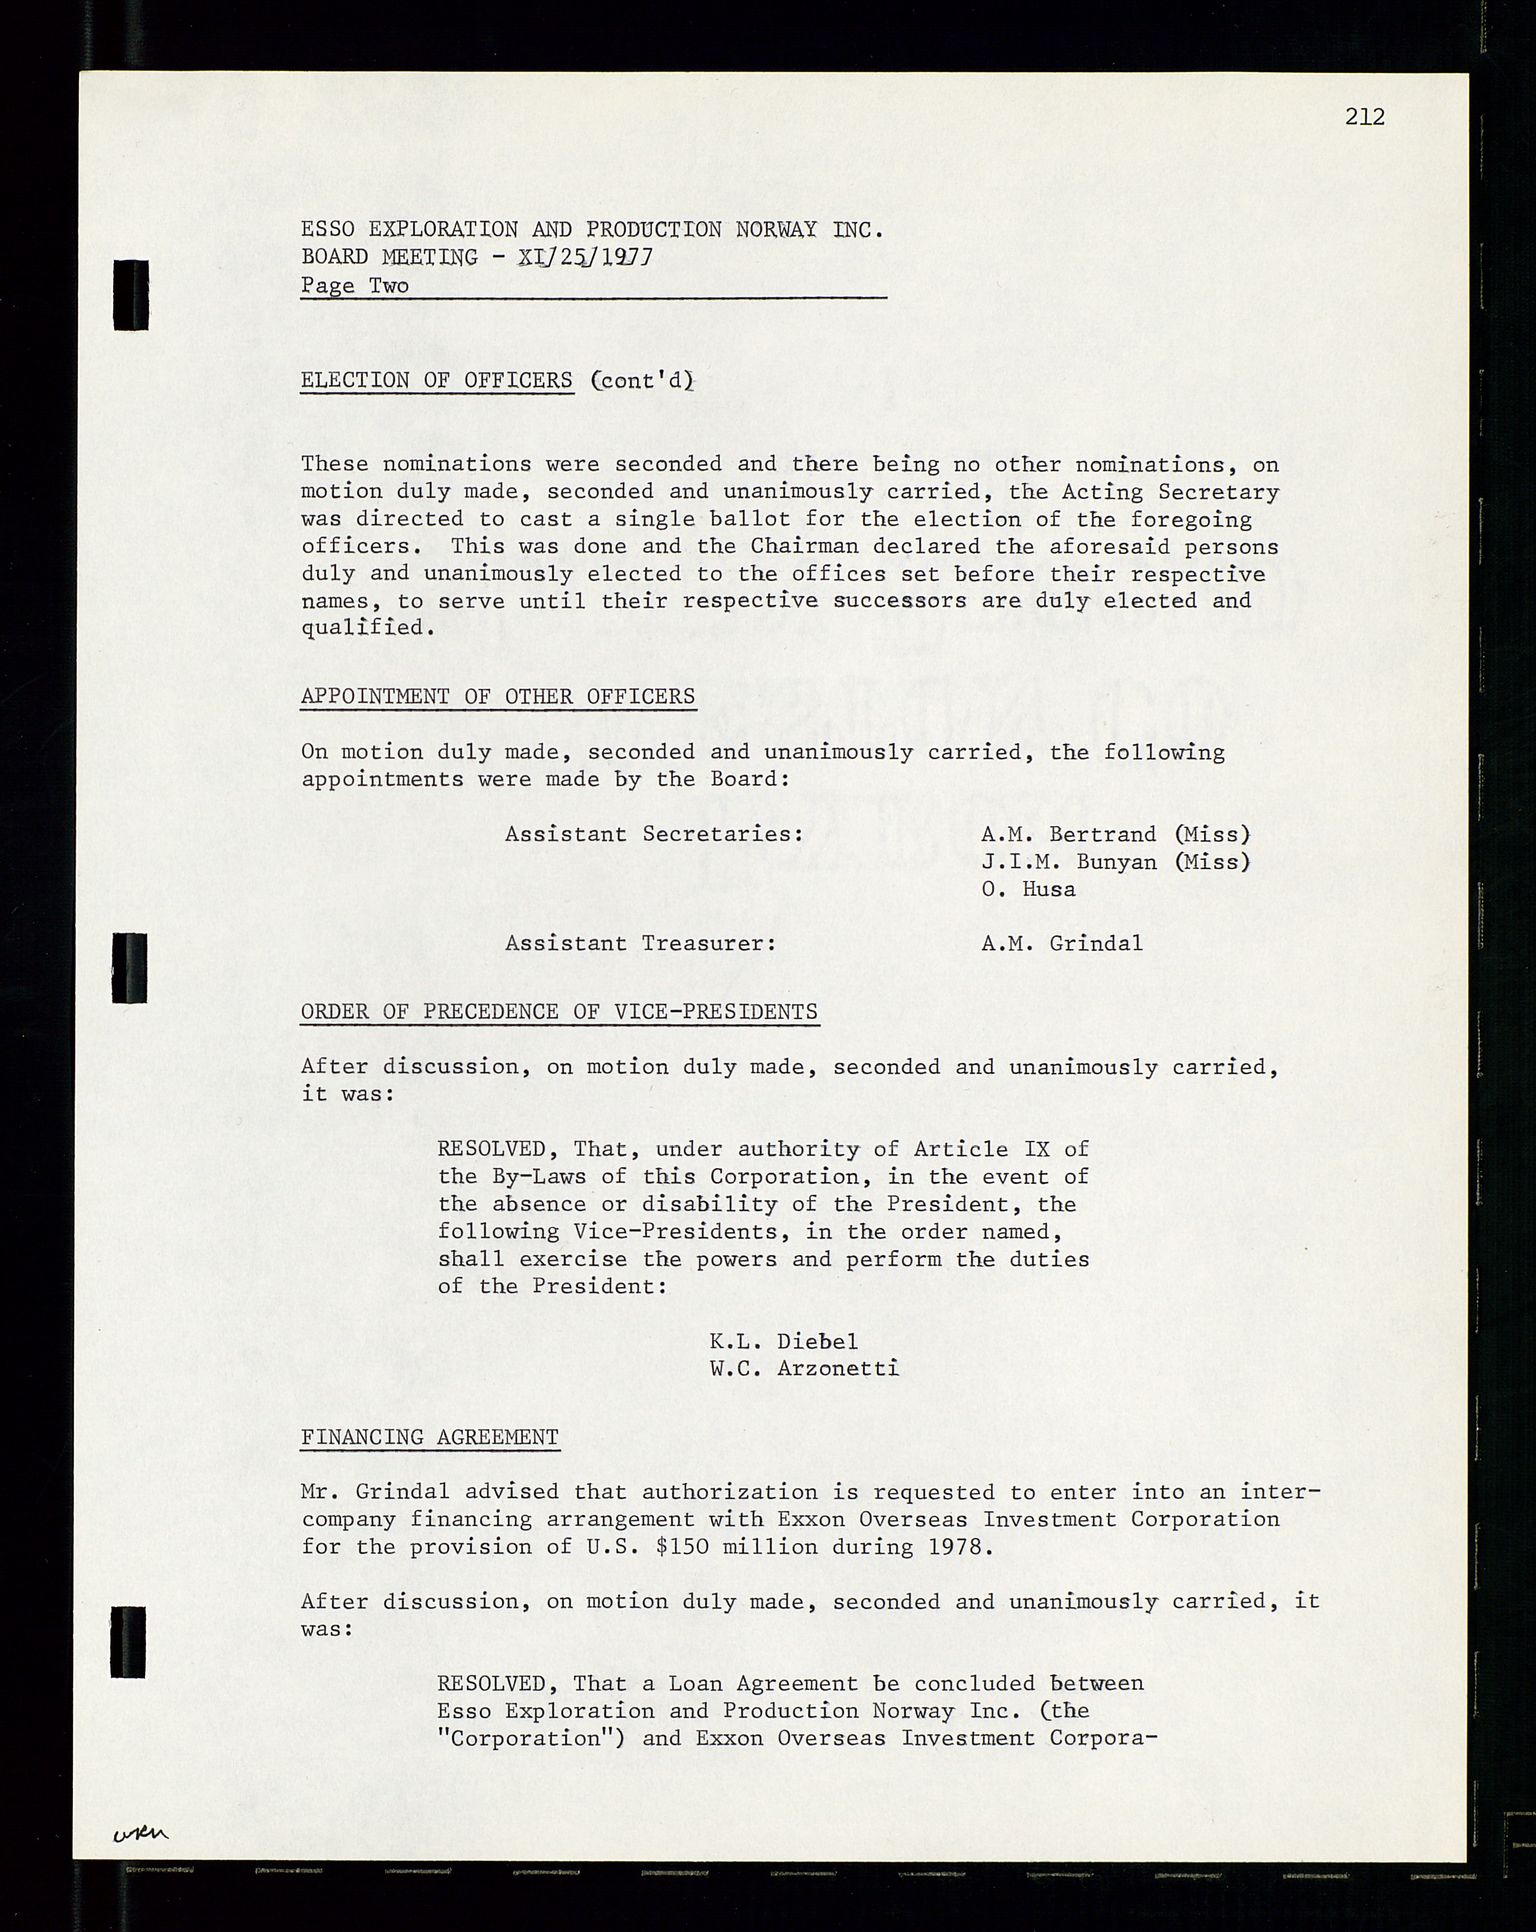 Pa 1512 - Esso Exploration and Production Norway Inc., SAST/A-101917/A/Aa/L0001/0002: Styredokumenter / Corporate records, Board meeting minutes, Agreements, Stocholder meetings, 1975-1979, p. 74